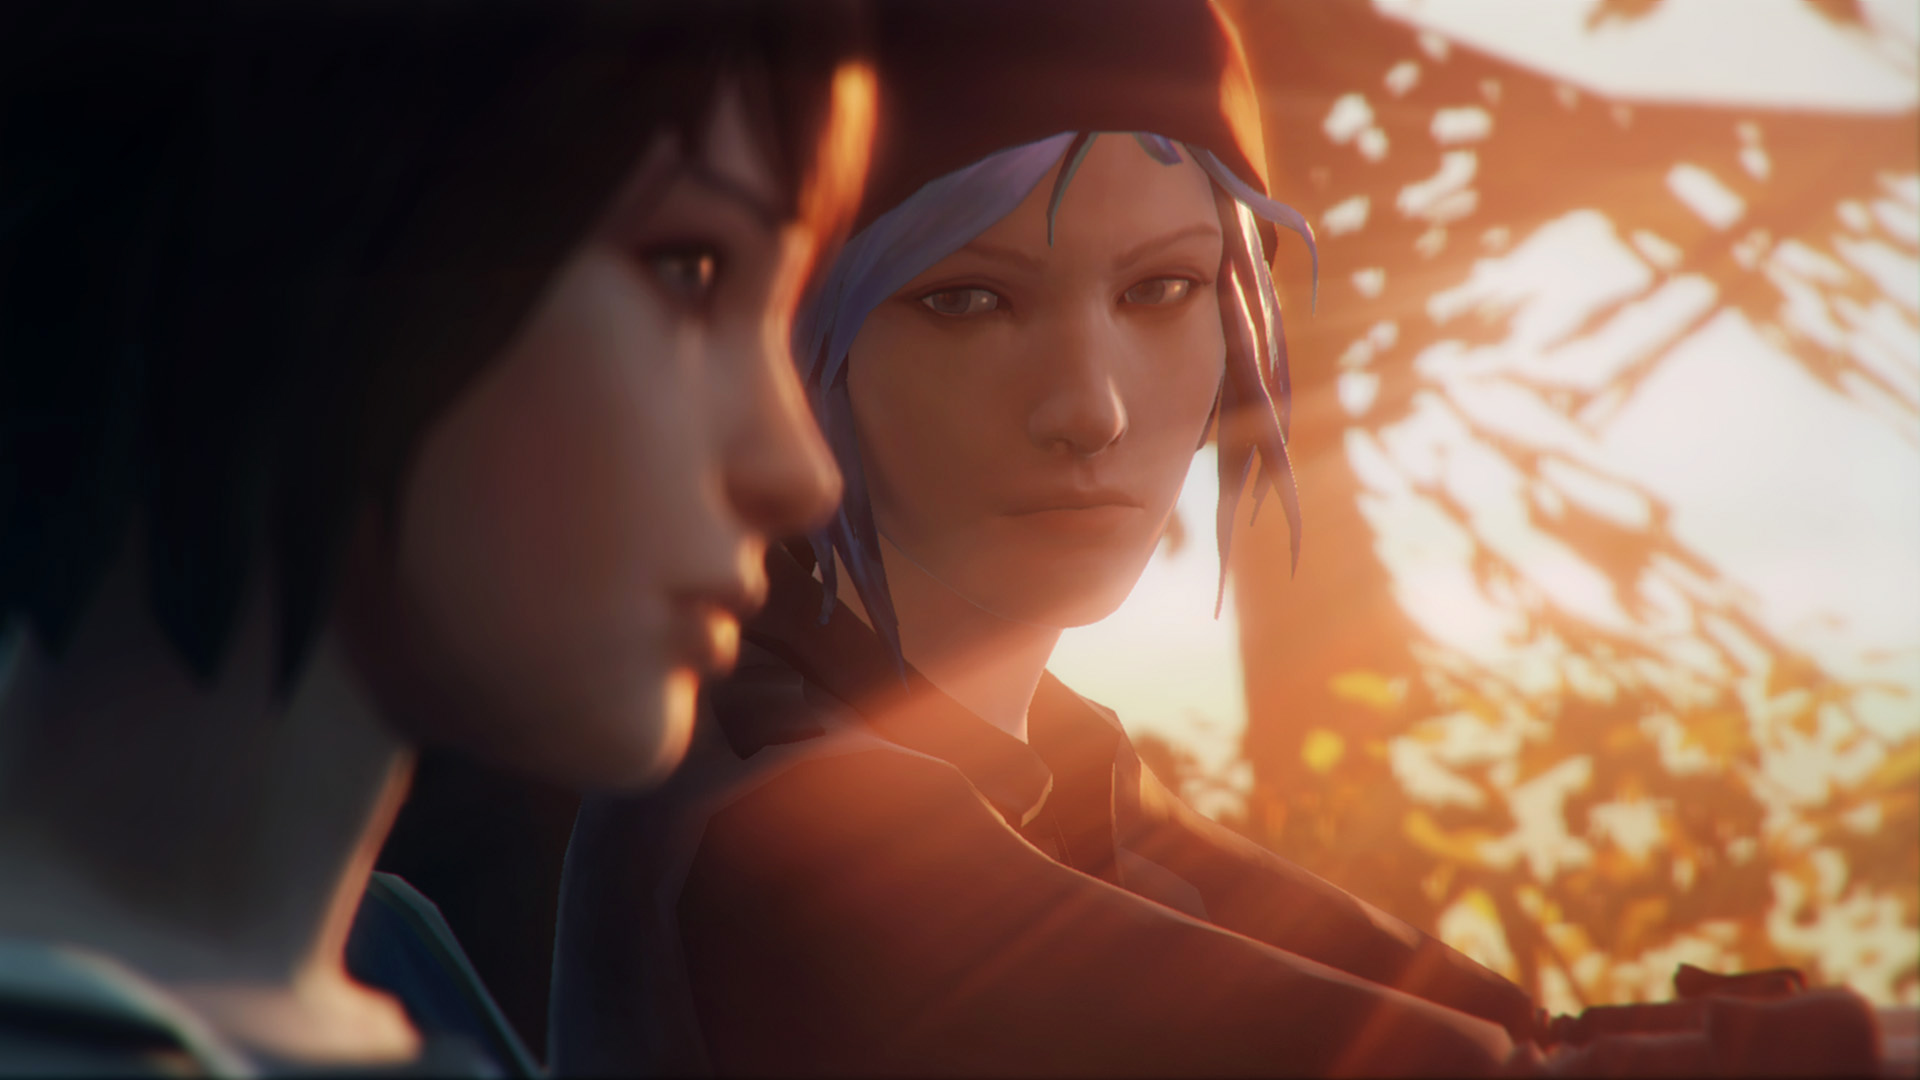 How all the Life is Strange games are connected